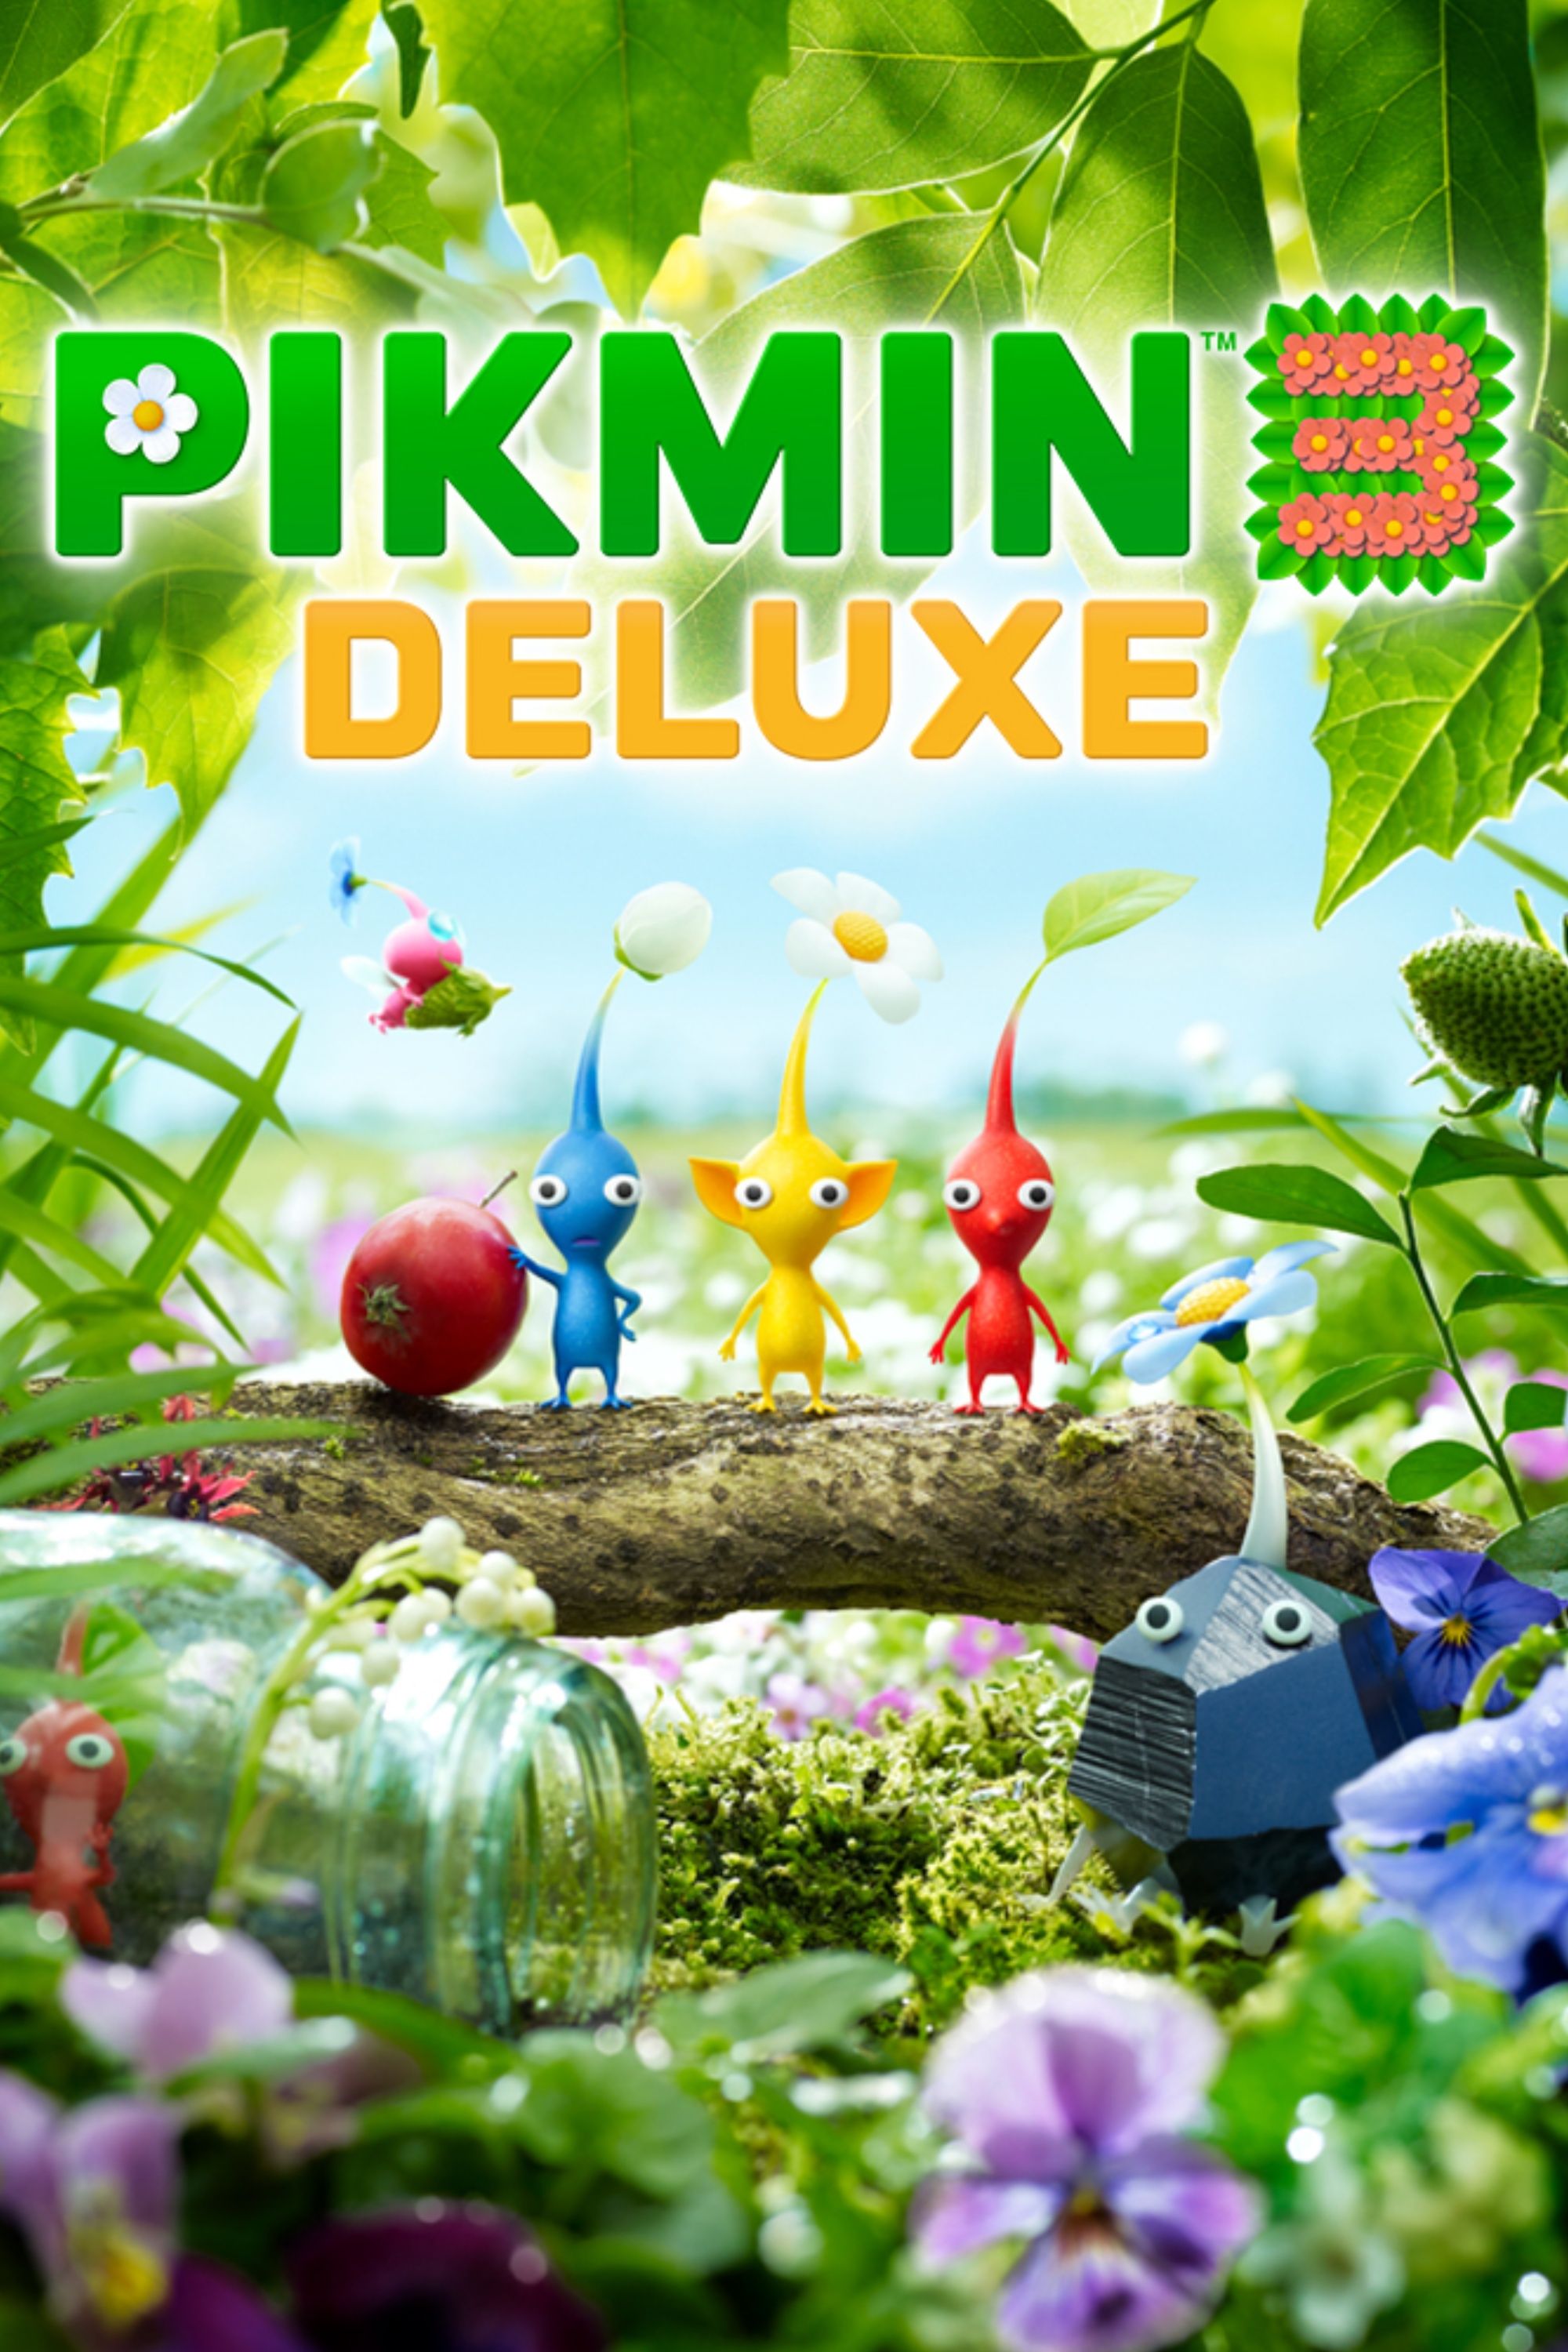 pikmin 3 deluxe cover art